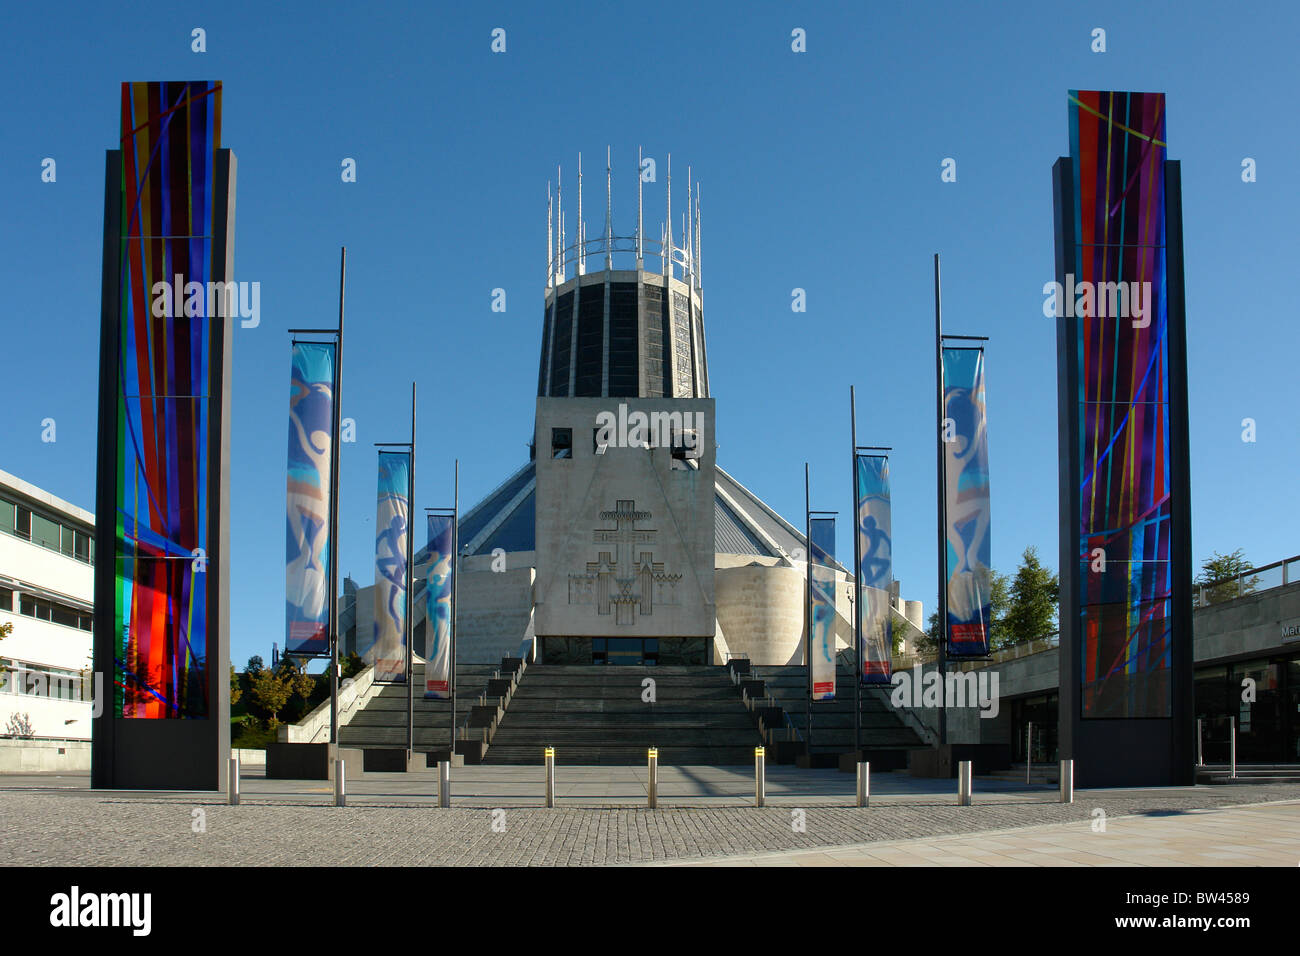 Metropolitan Cathedral of Christ the King, Mount Pleasant, Liverpool, Merseyside, England, United Kingdom Banque D'Images